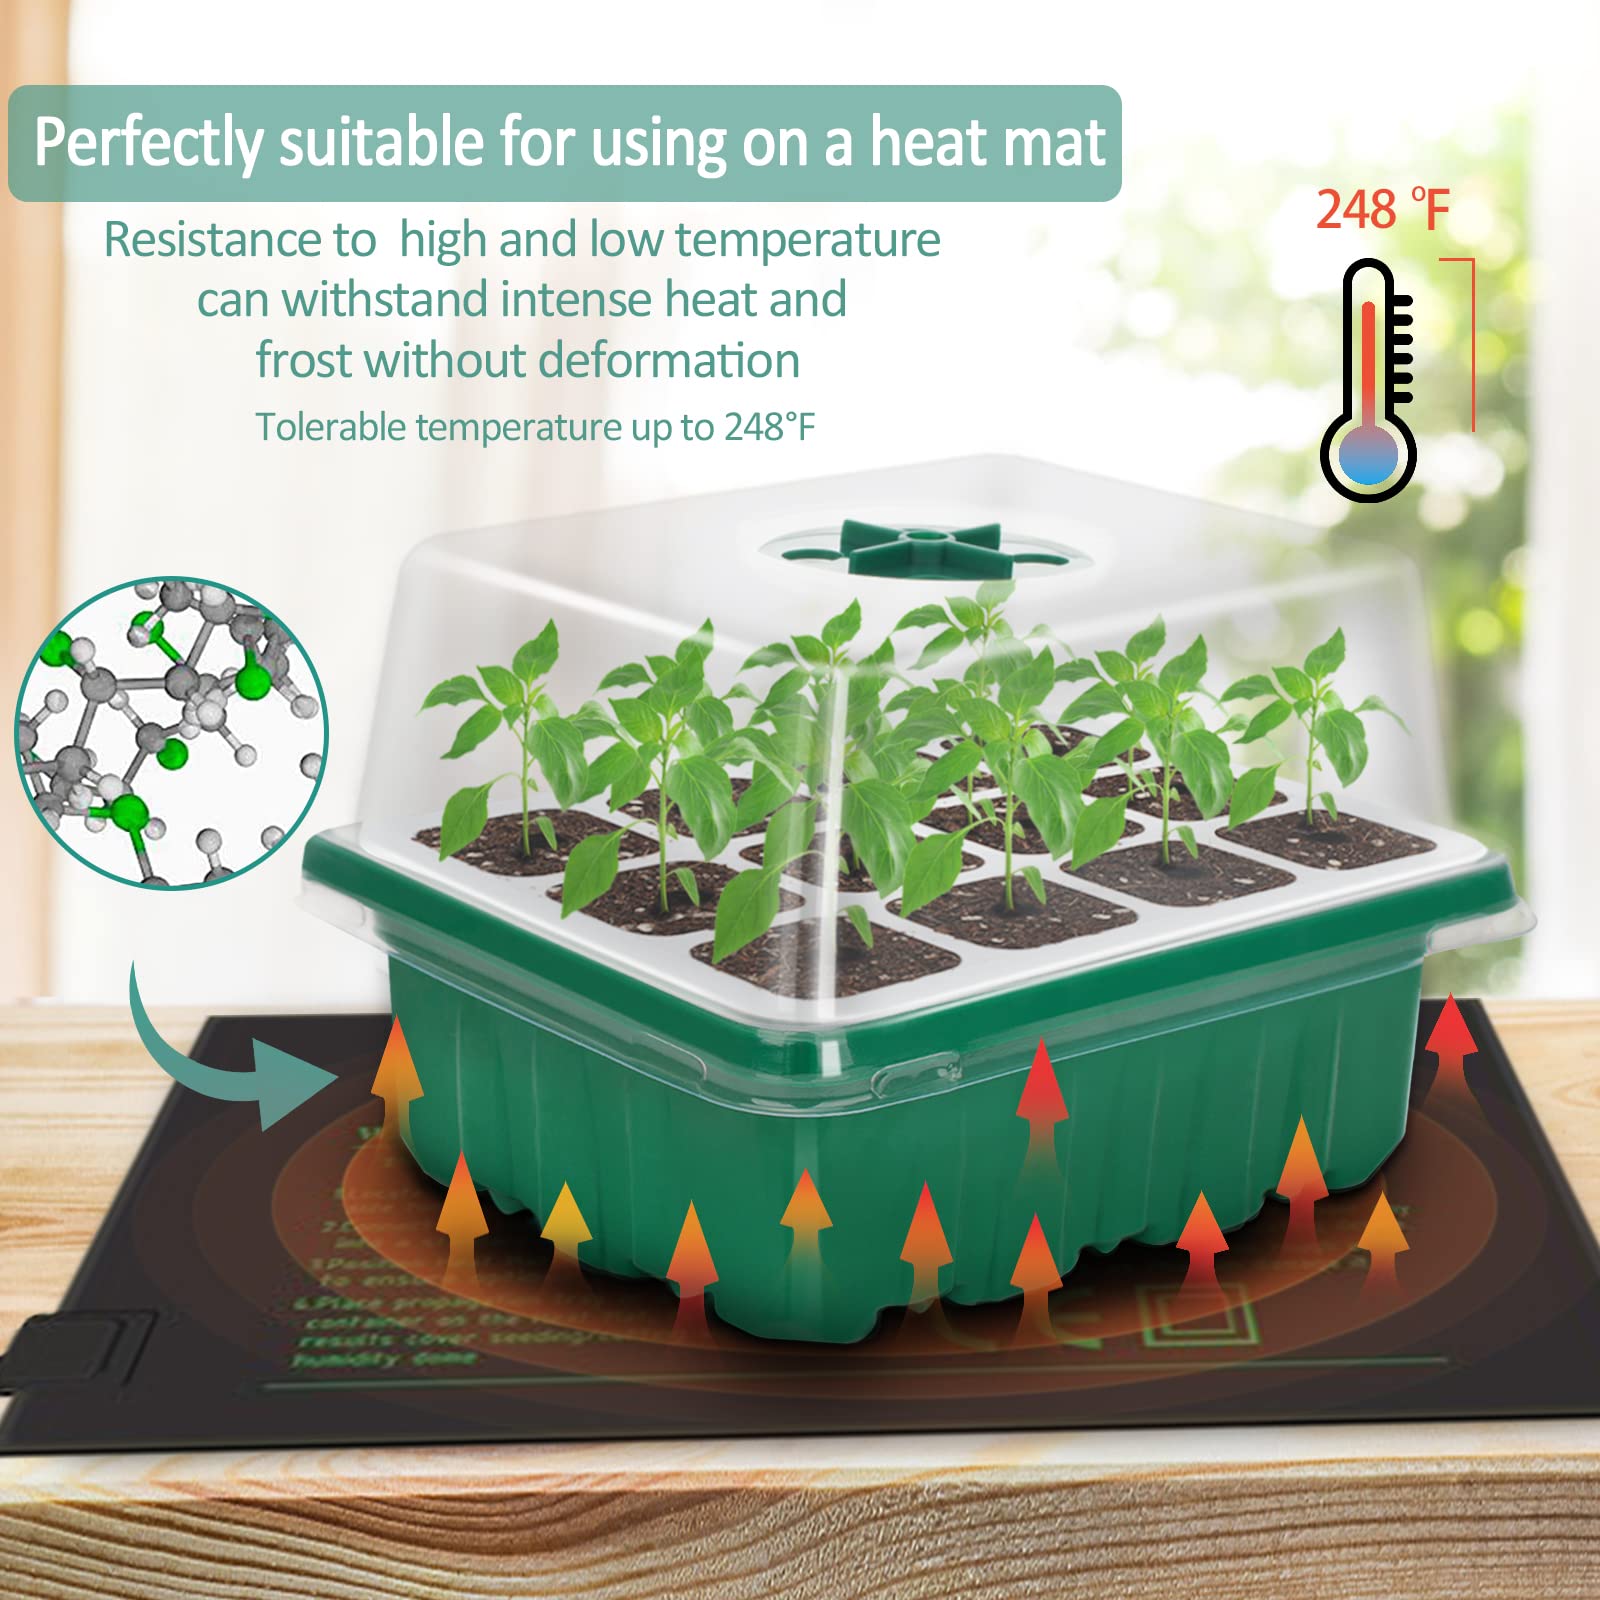 Patigrow 5 Packs Seed Starter Tray Flexible Silicone 60 Cells Reusable Seed Starter Kit with Humidity Dome Dishwasher Safe Seed Starting Trays Plant Starter Kit Indoor Greenhouse for Seed Starting